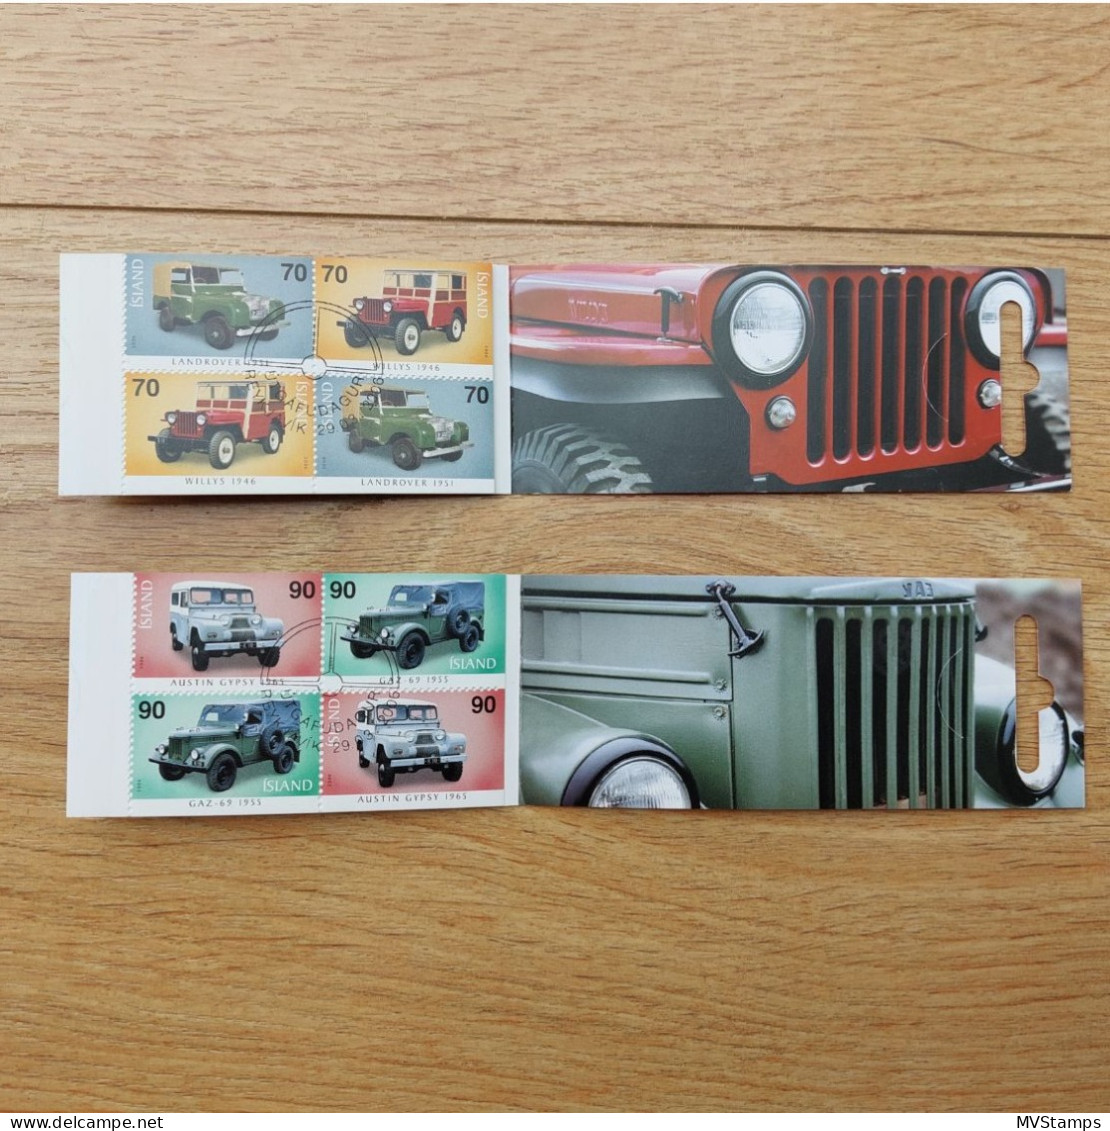 Iceland 2006 Set Stampbooklets Auto's/Cars Stamps (Michel MH 22/23) Used - Cuadernillos